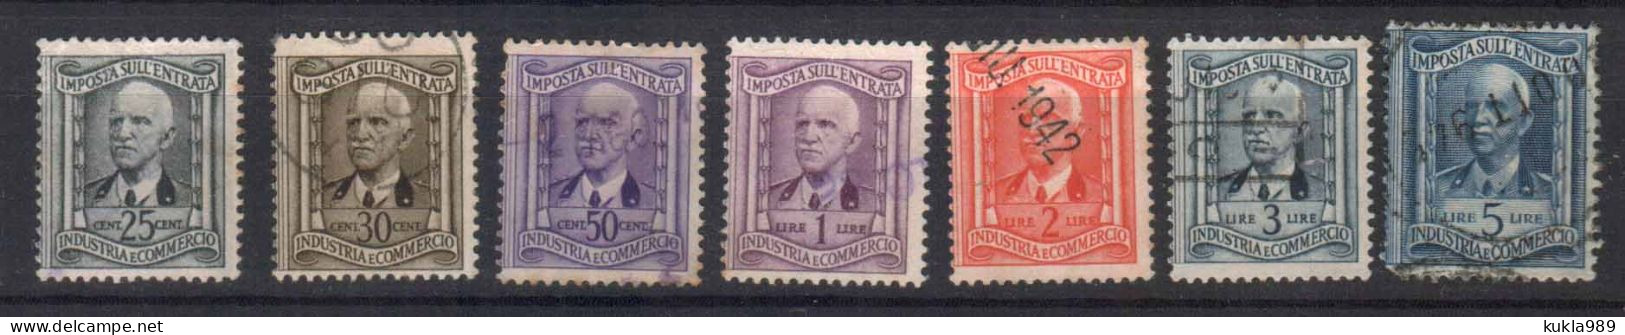 ITALY , C.1940s FISCAL REVENUE TAX 7 STAMPS - Fiscales